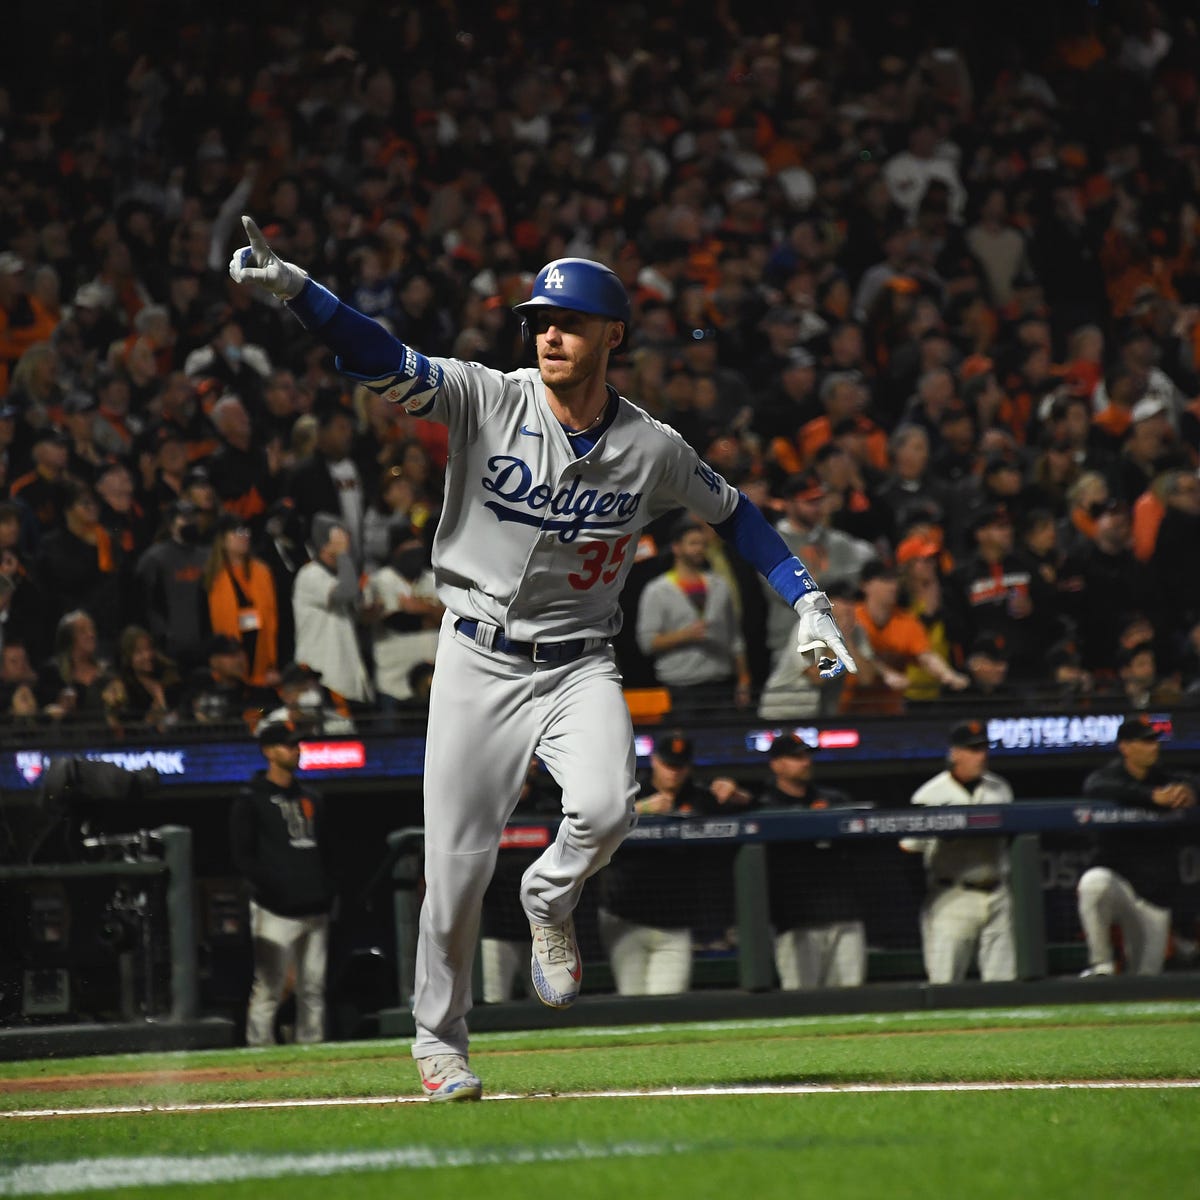 Dodgers Highlights: Corey Seager, Cody Bellinger & Will Smith